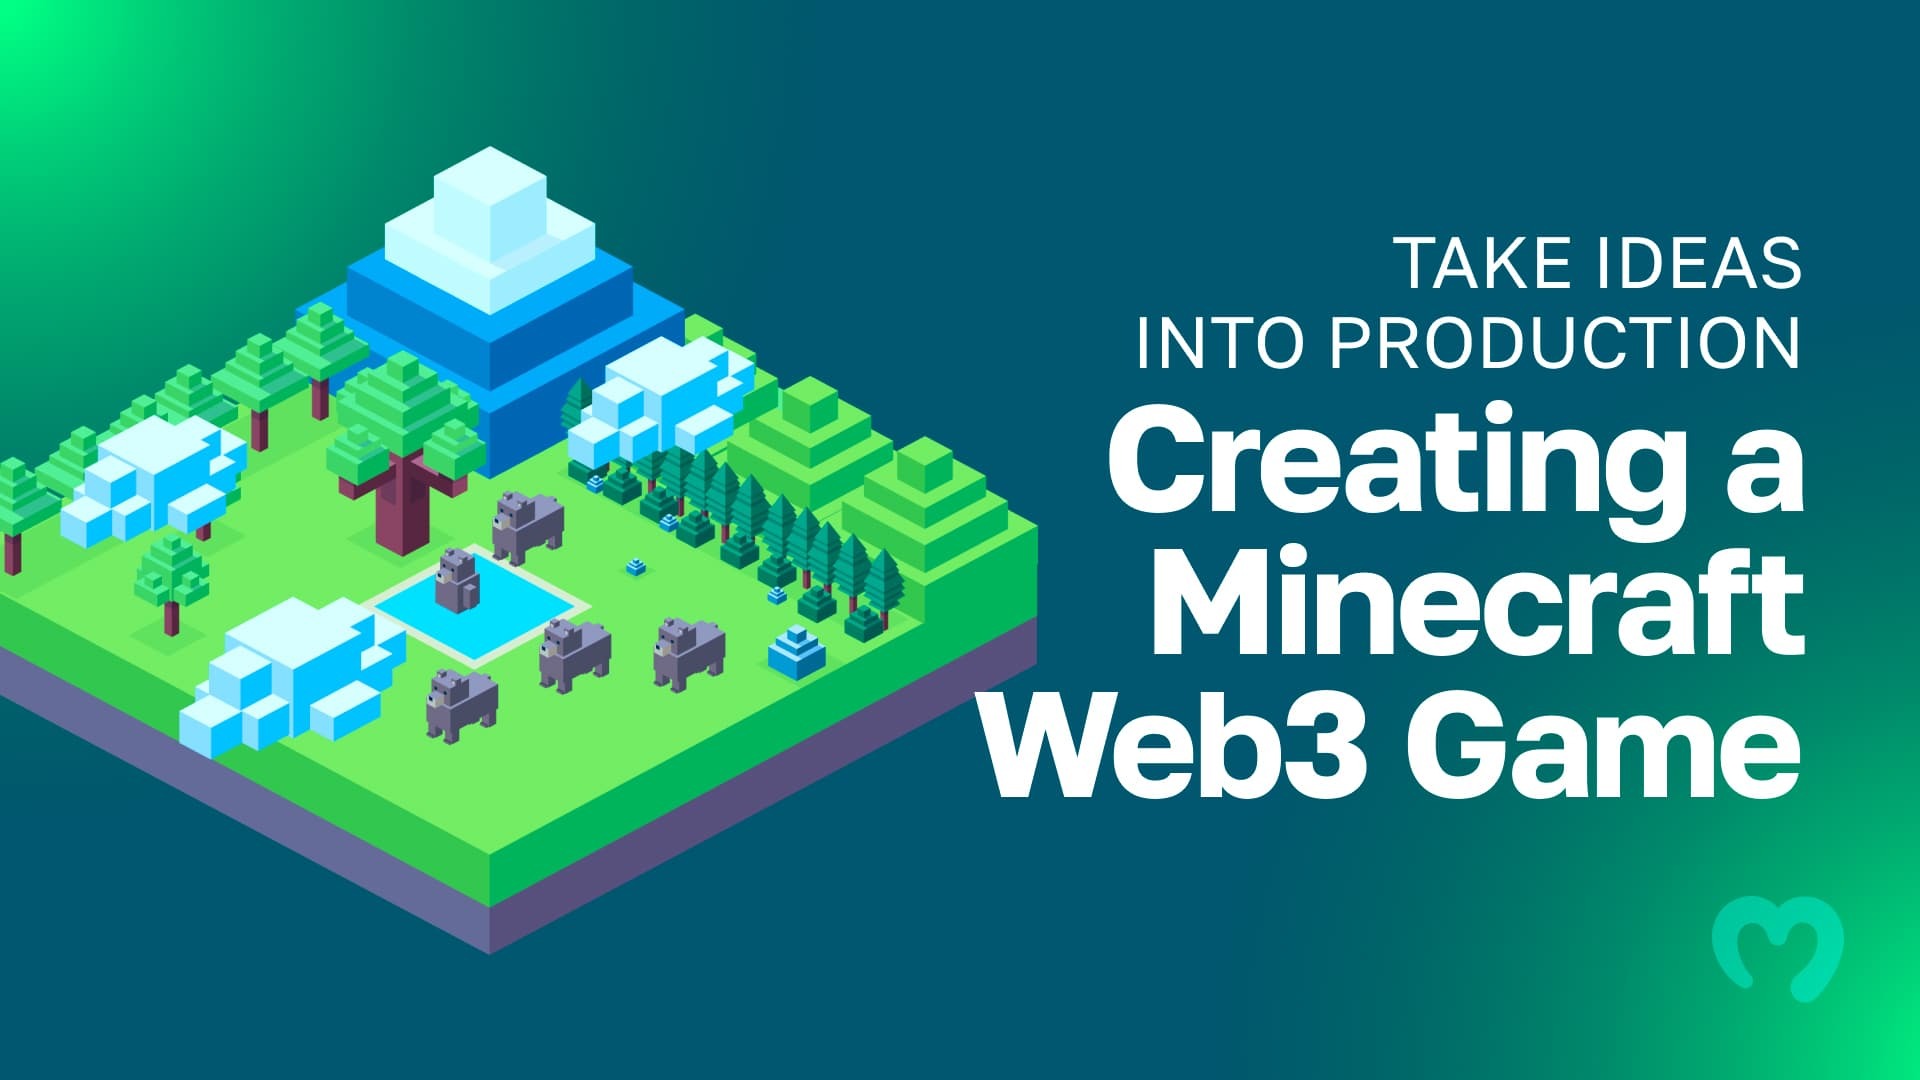 An in-game platform inside Minecraft, and a title stating Take Ideas Into Production - Creating a Minecraft Web3 Game.